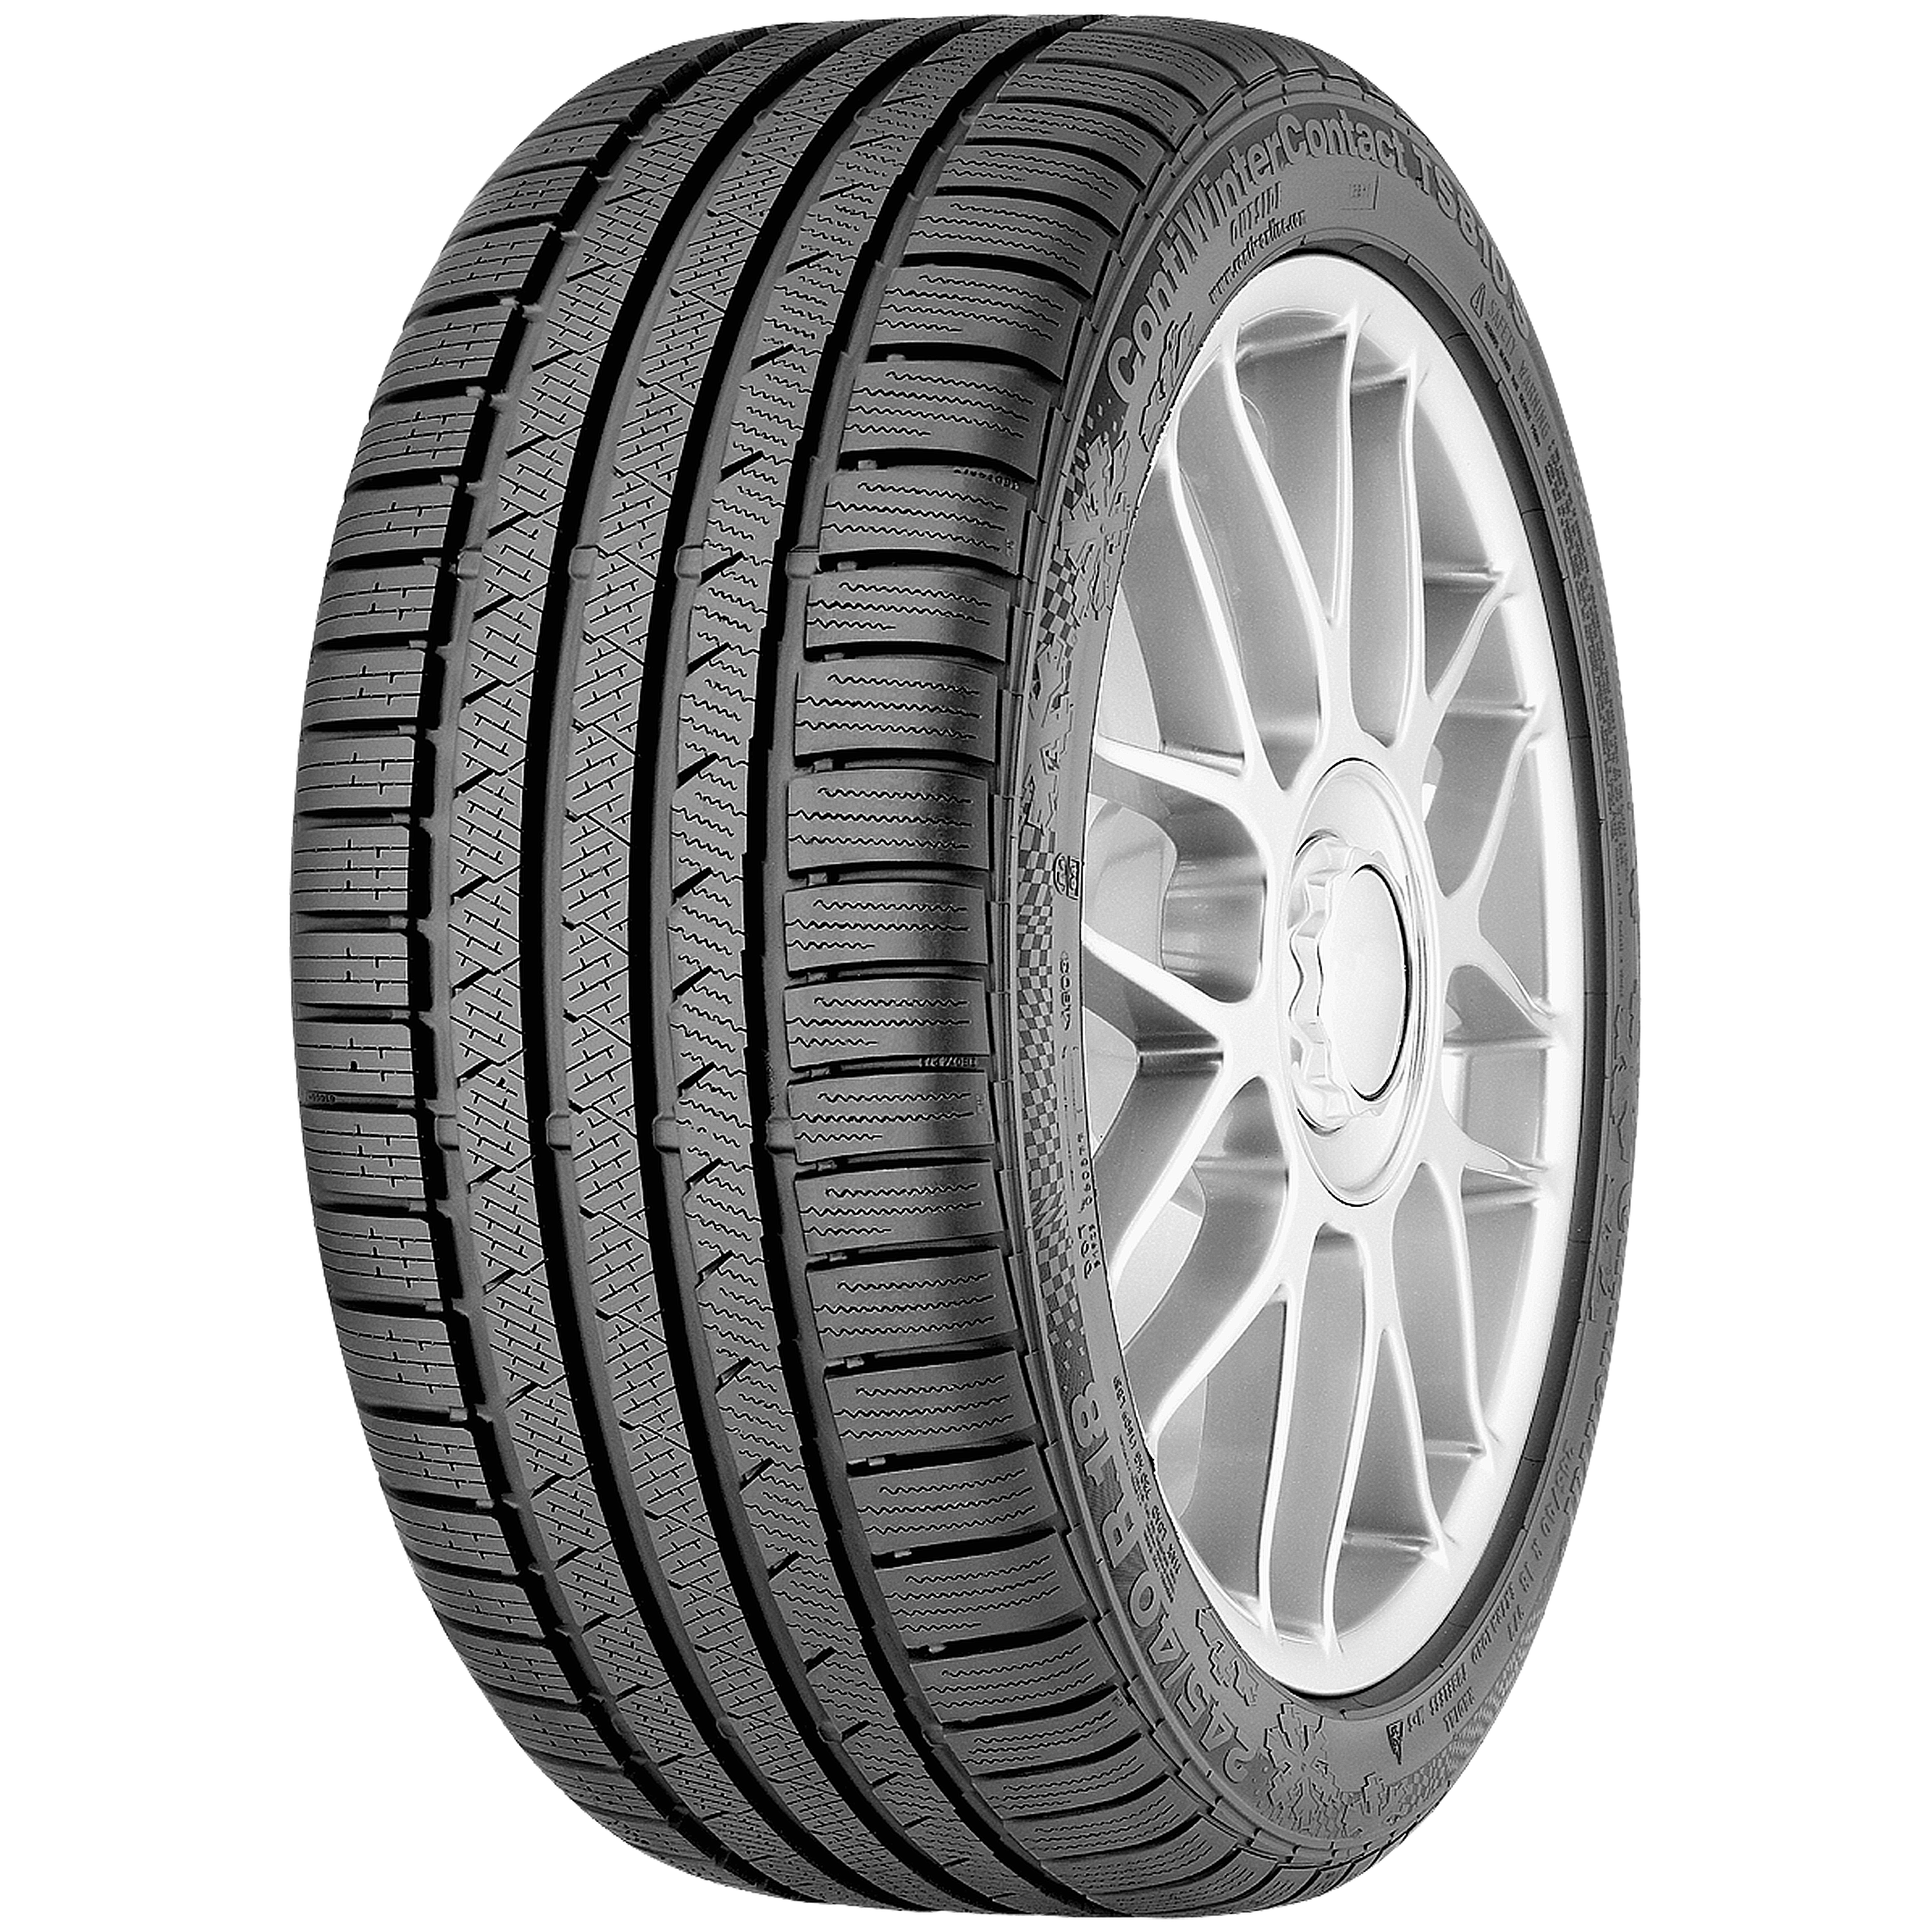 ContiWinterContact TS sporty tire luxury-class winter powerful 810 and cars medium The S: for